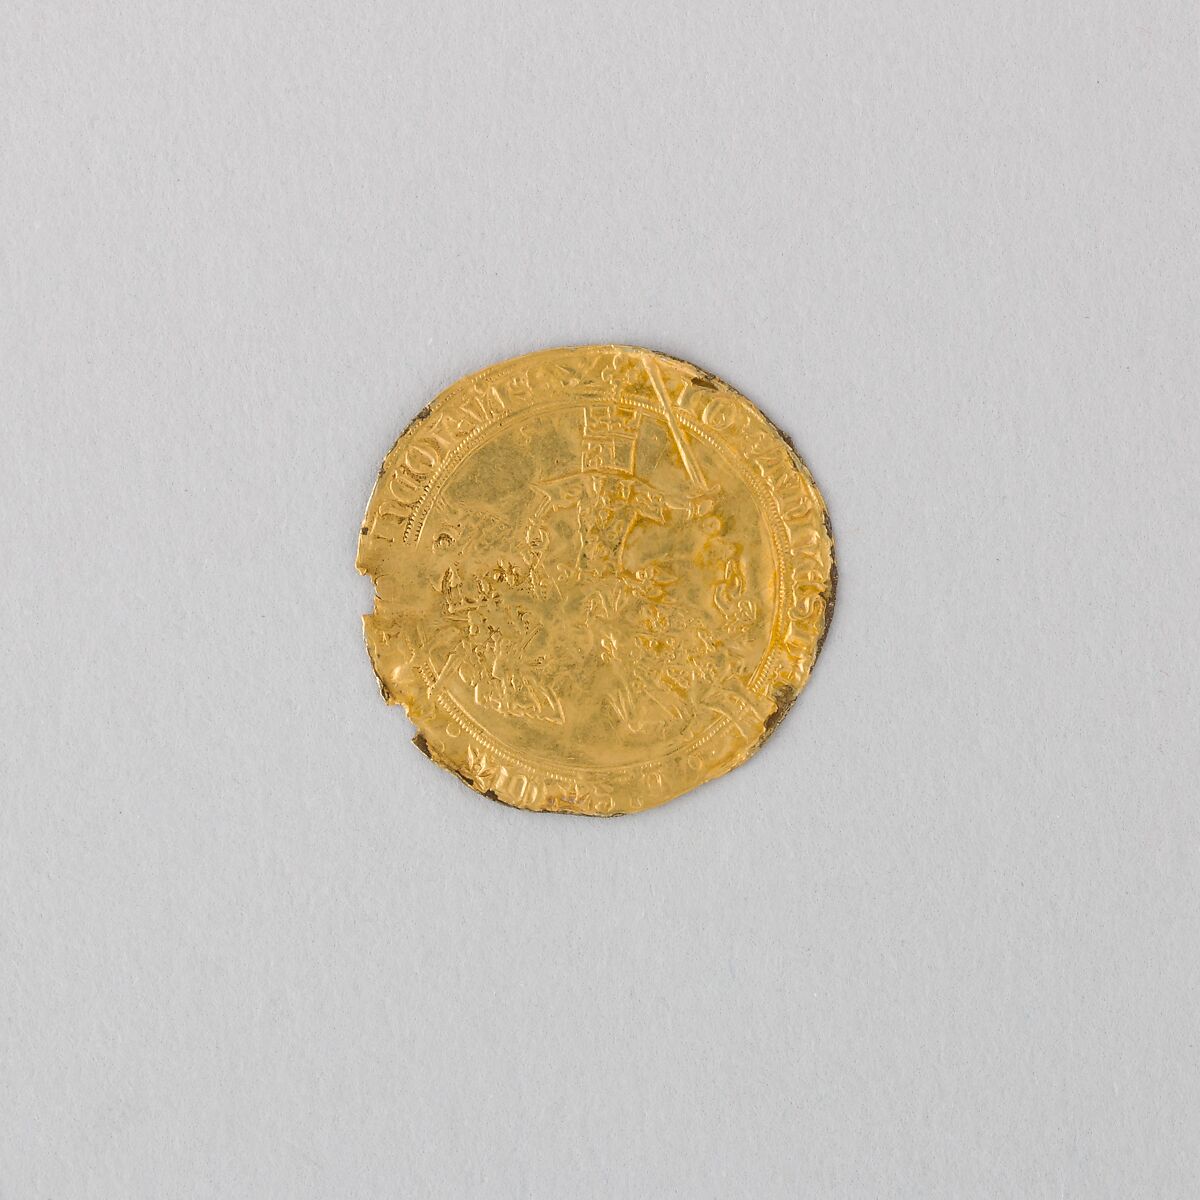 Coin (Franc) Showing Jean le Bon, Gold, French 